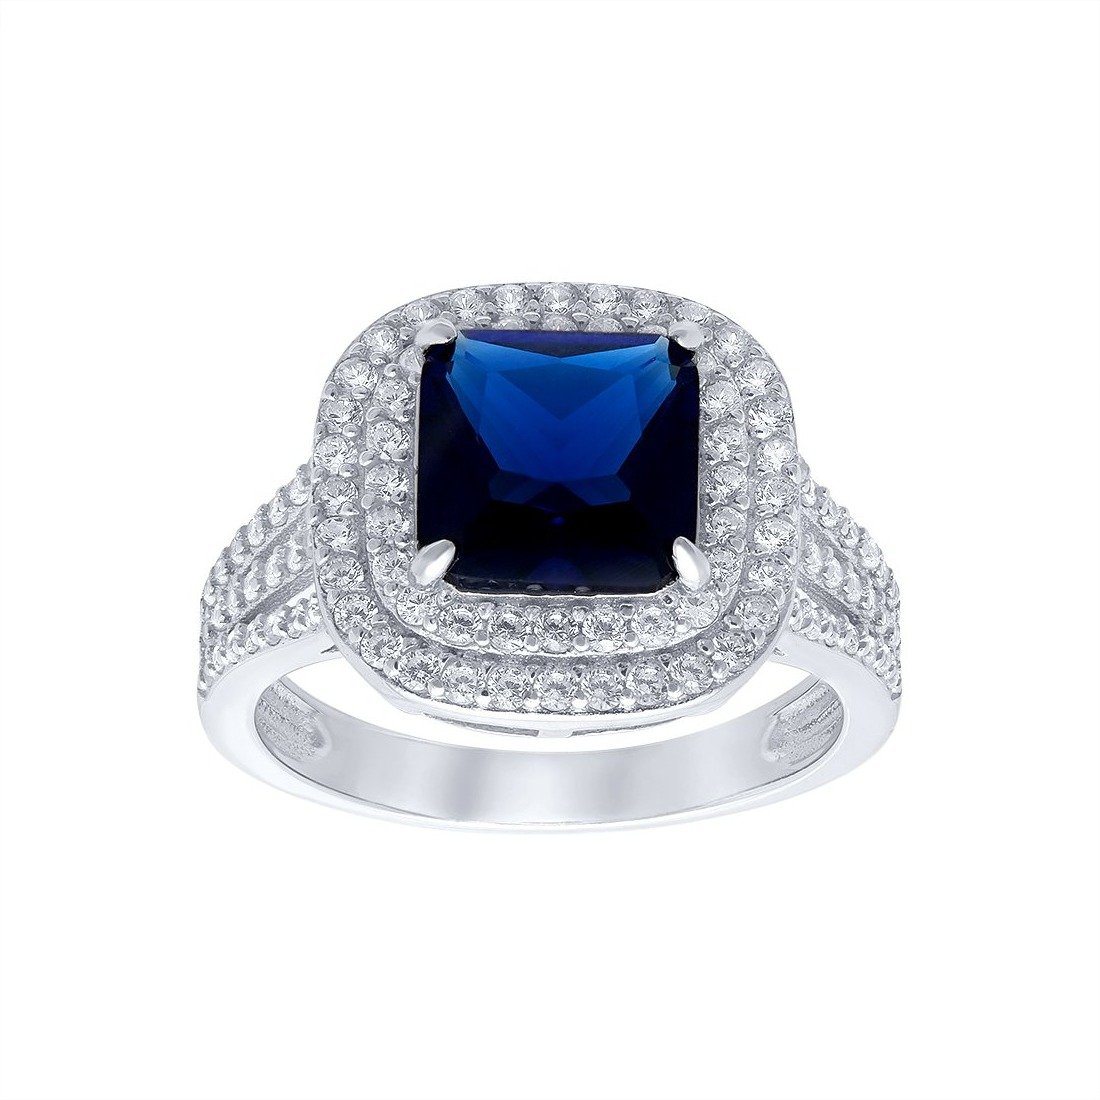 Blue Sapphire Cubic Zirconia Ring in Sterling Silver Rings Bevilles 